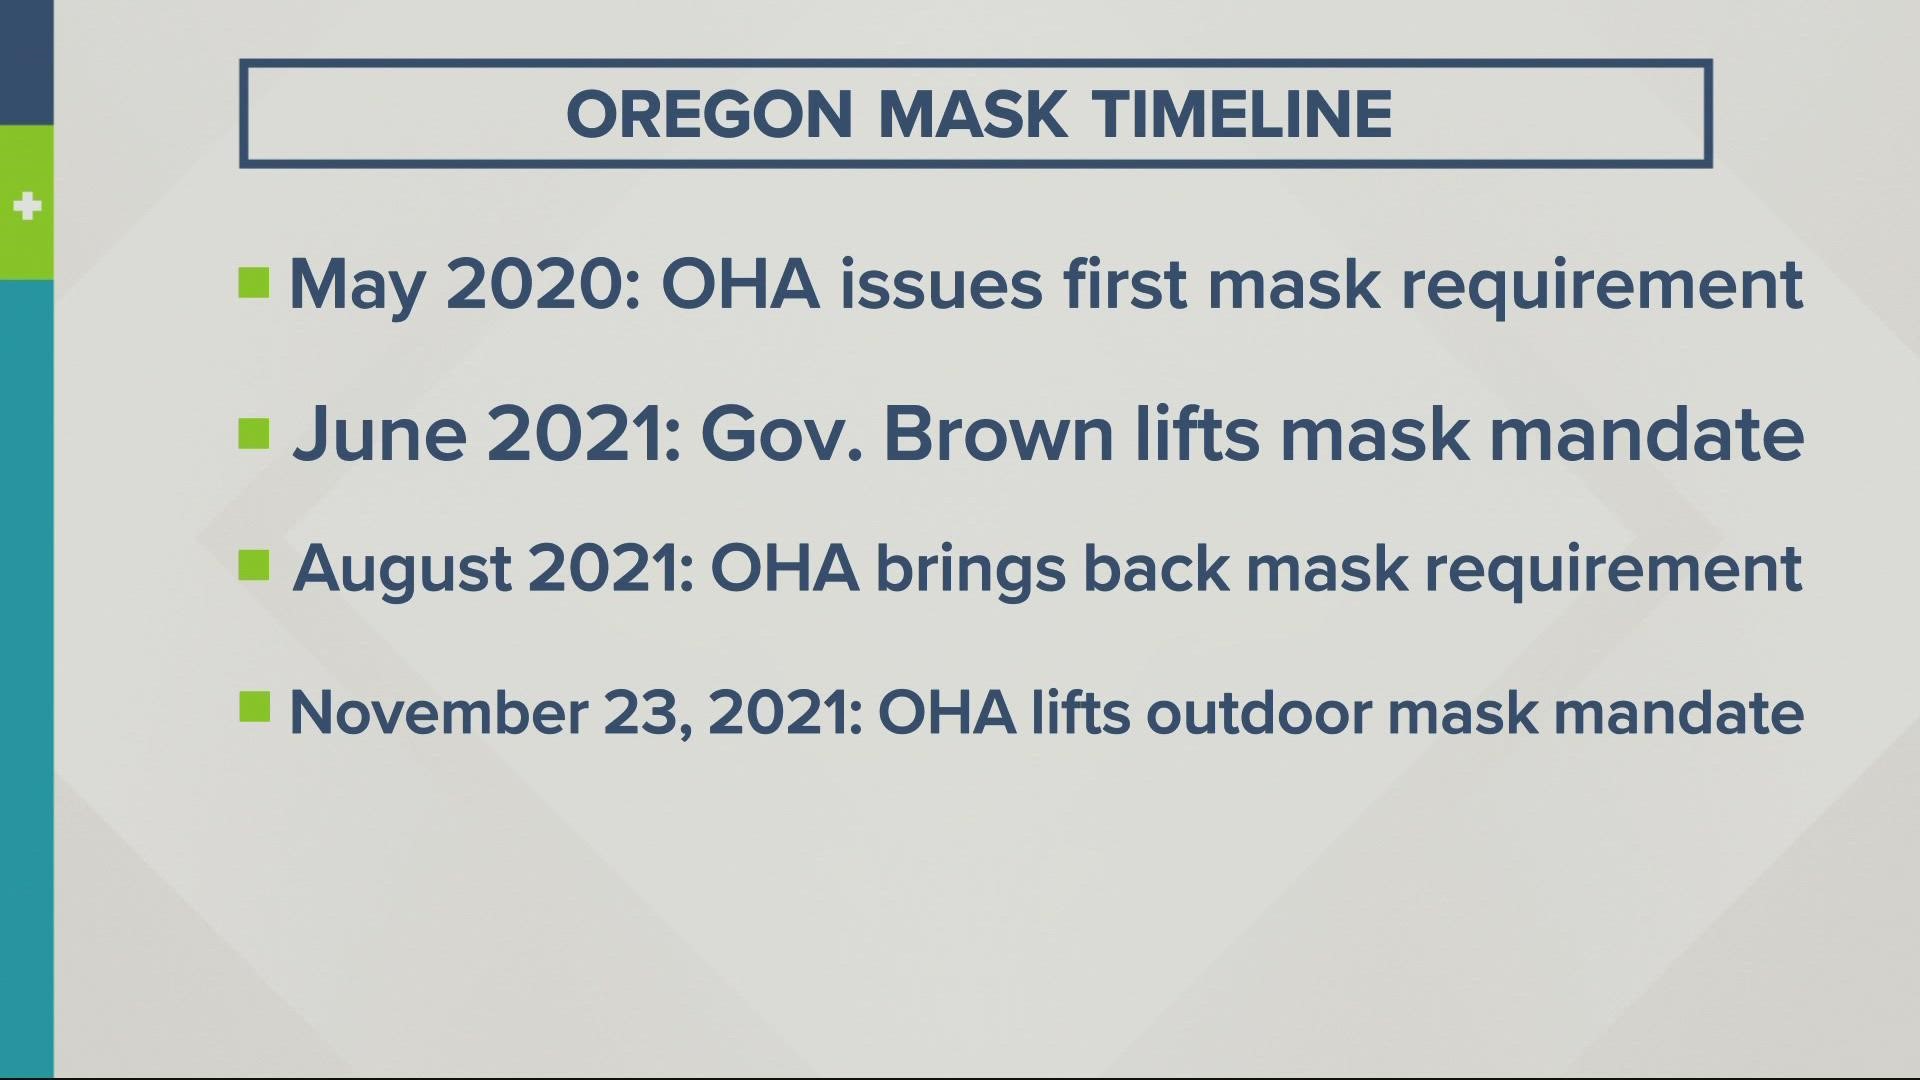 Oregon is one of a handful of states that still require masks, and likely will be for a while.